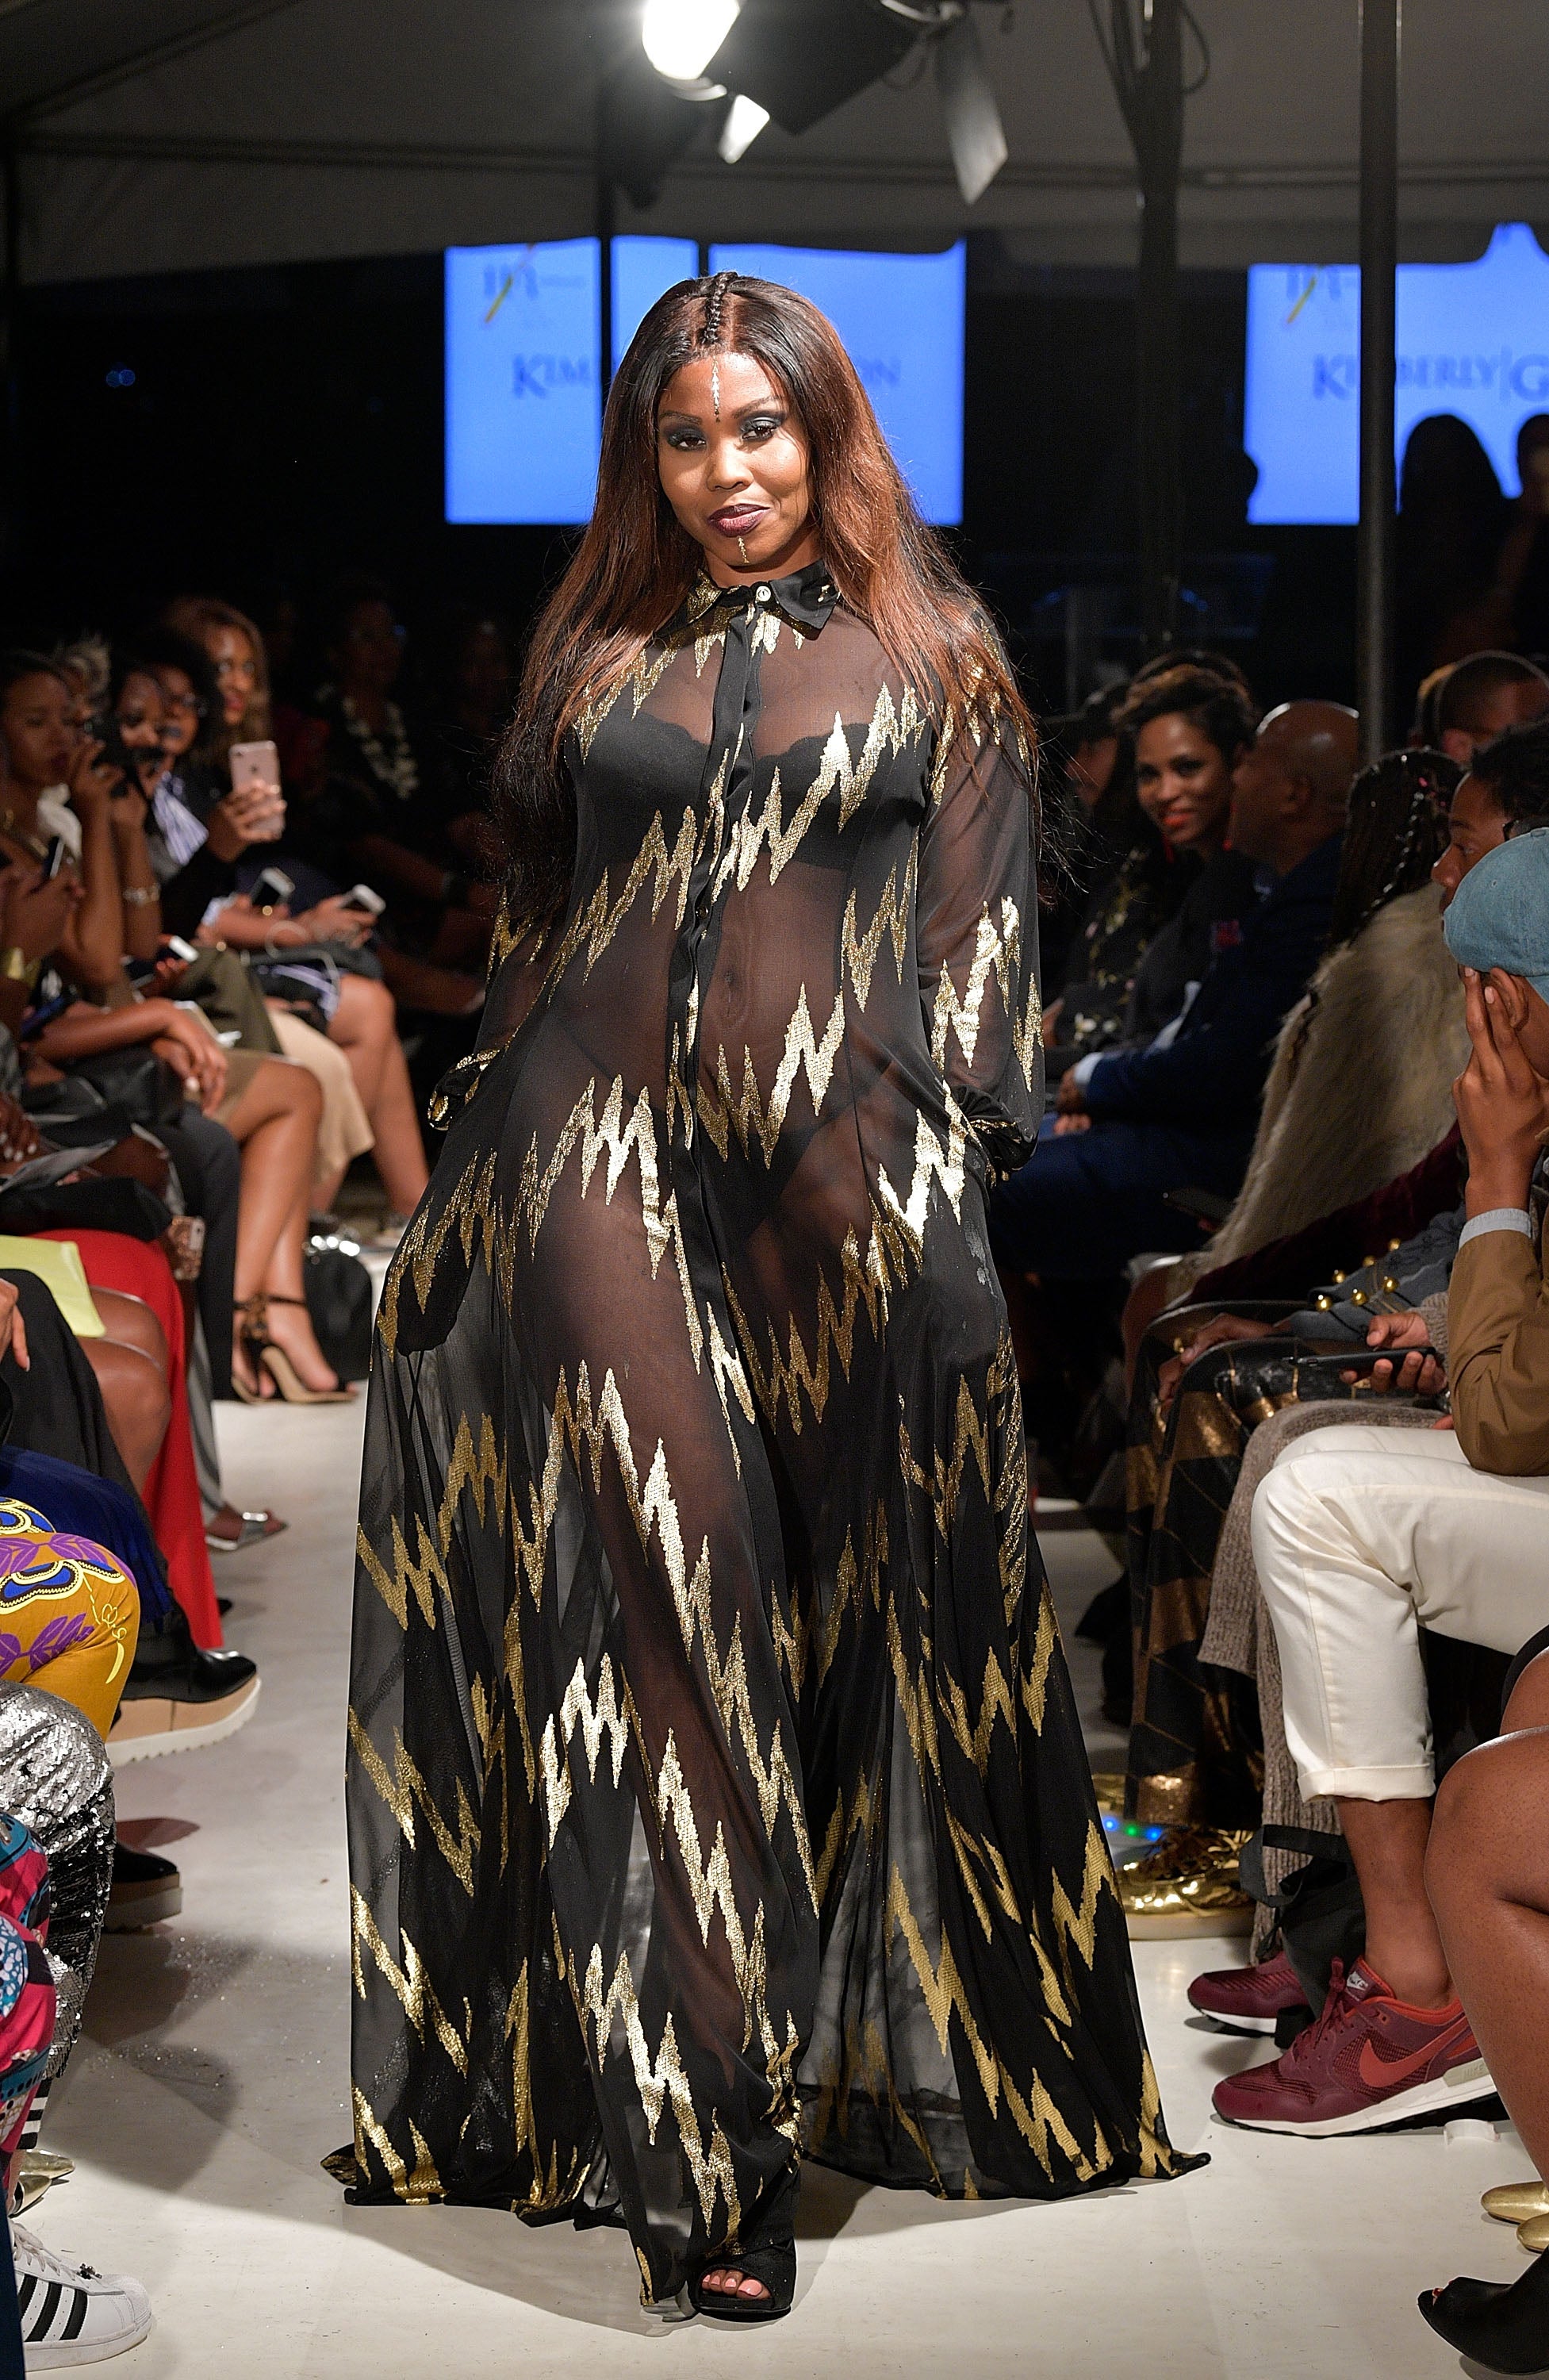 Harlem's Fashion Row Celebrates Its 10th Anniversary With A Legendary Fashion Week Event
